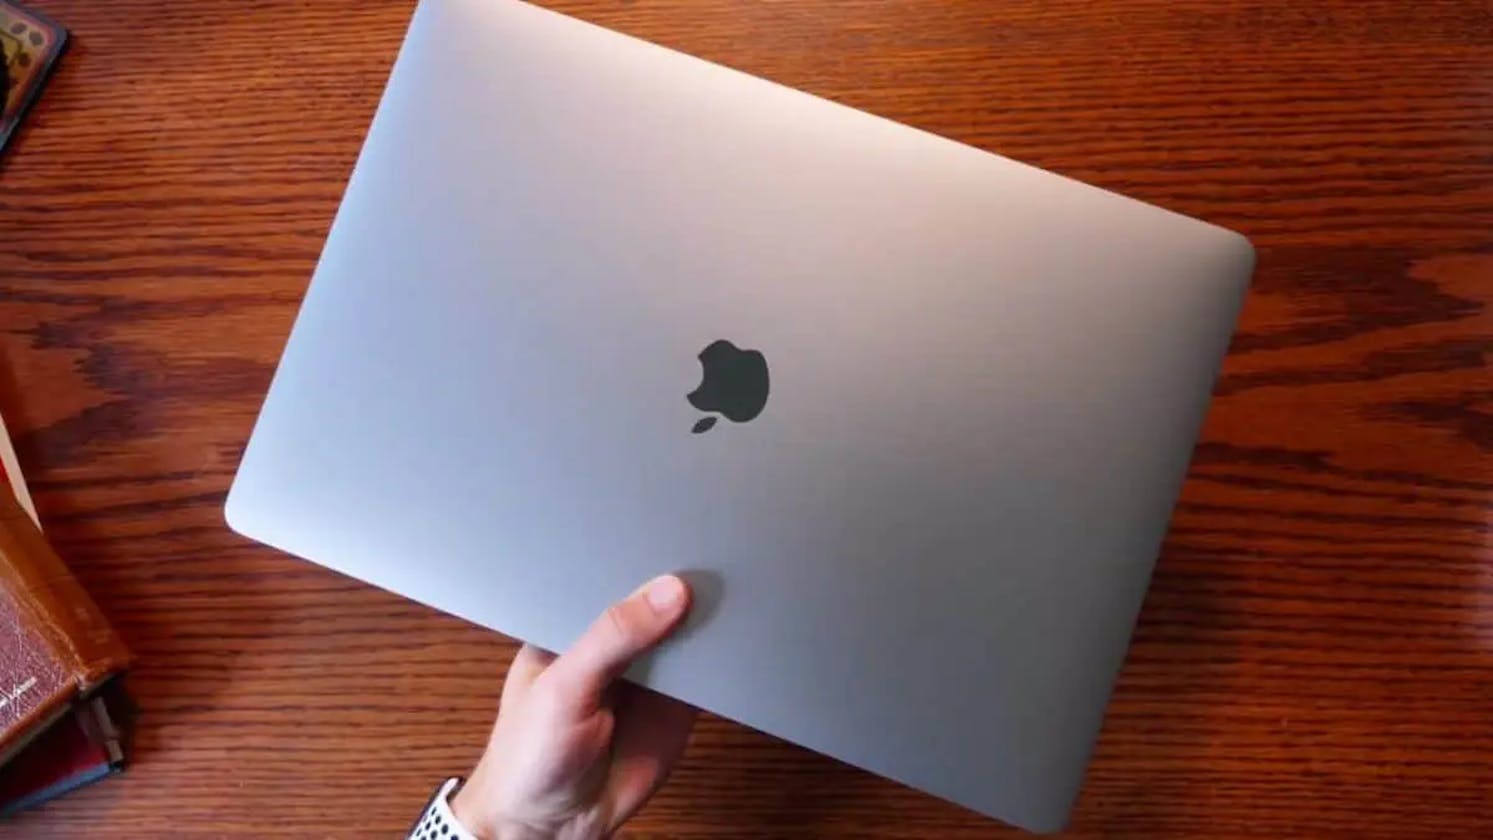 Achieving My MacBook Dream: A Journey from Aspiring Student to Independent Developer